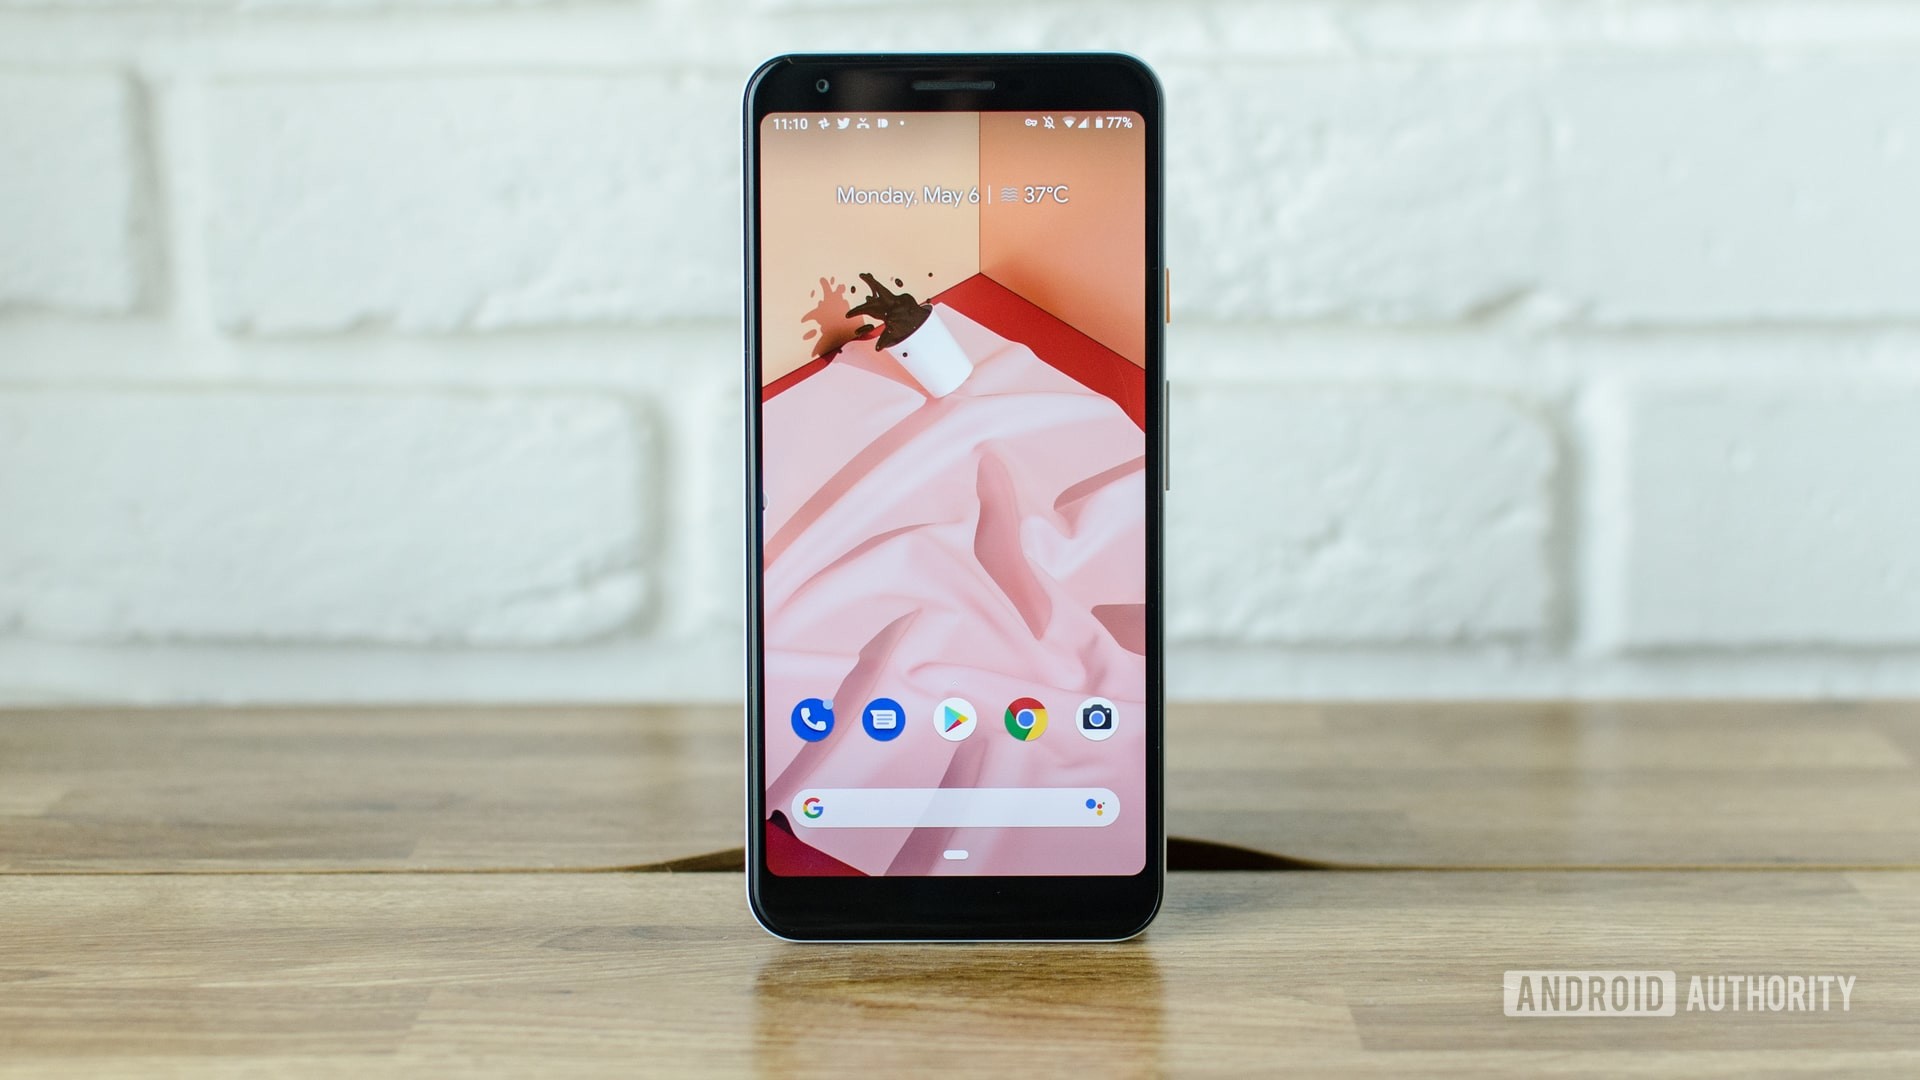 Pixel 3a XL in front of the phone